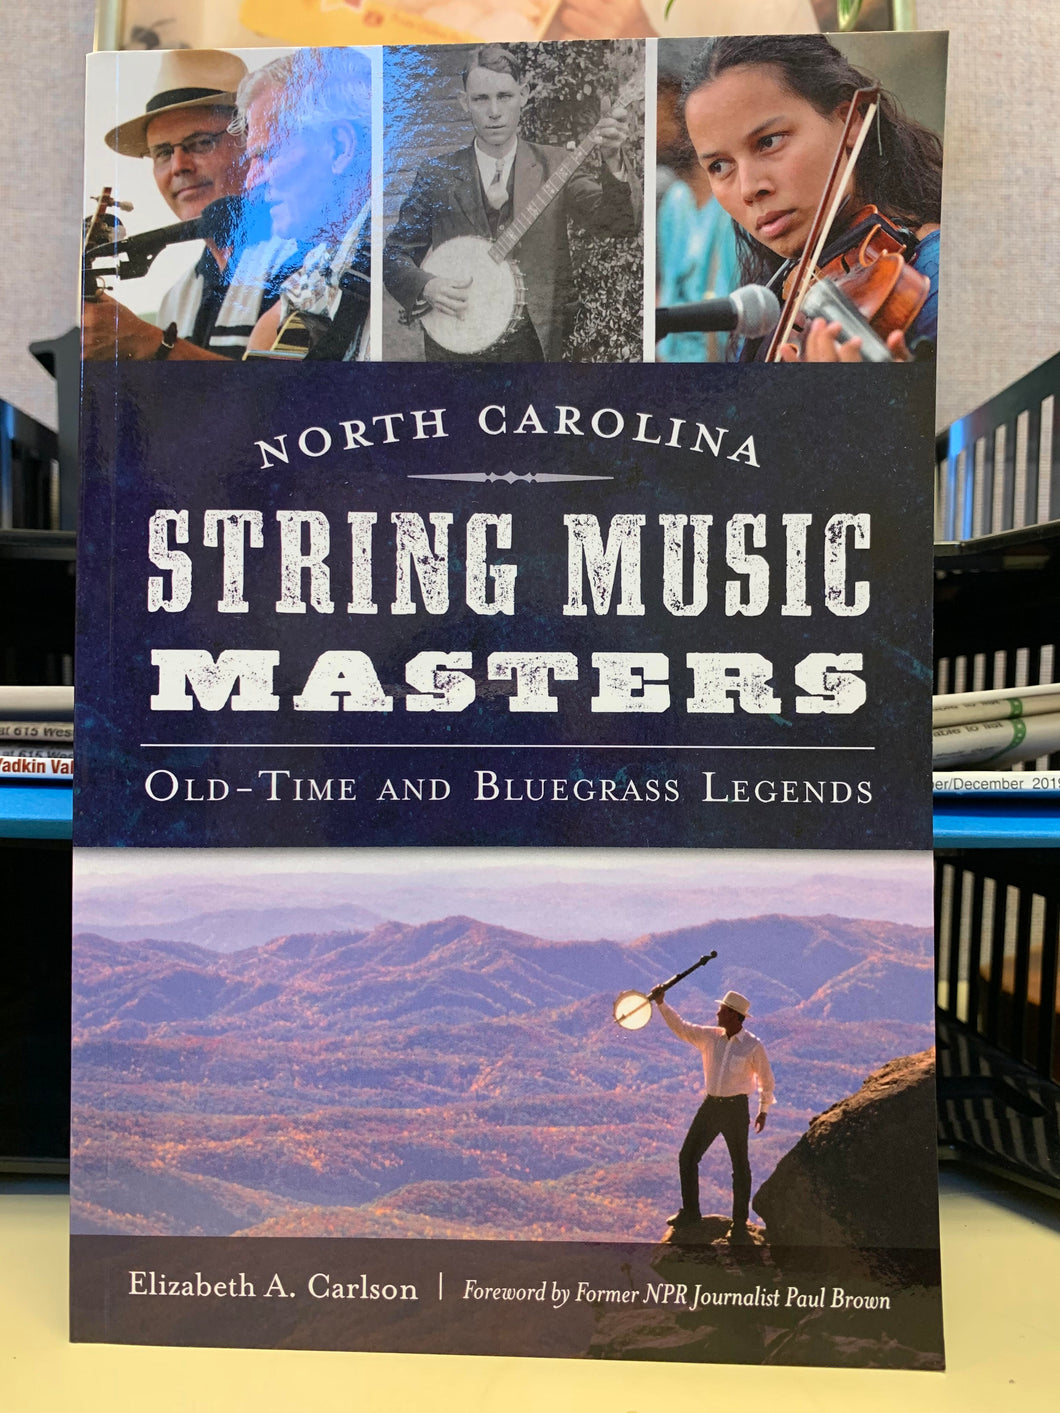 North Carolina String Music Masters: Old-Time and Bluegrass Legends by Elizabeth A. Carlson